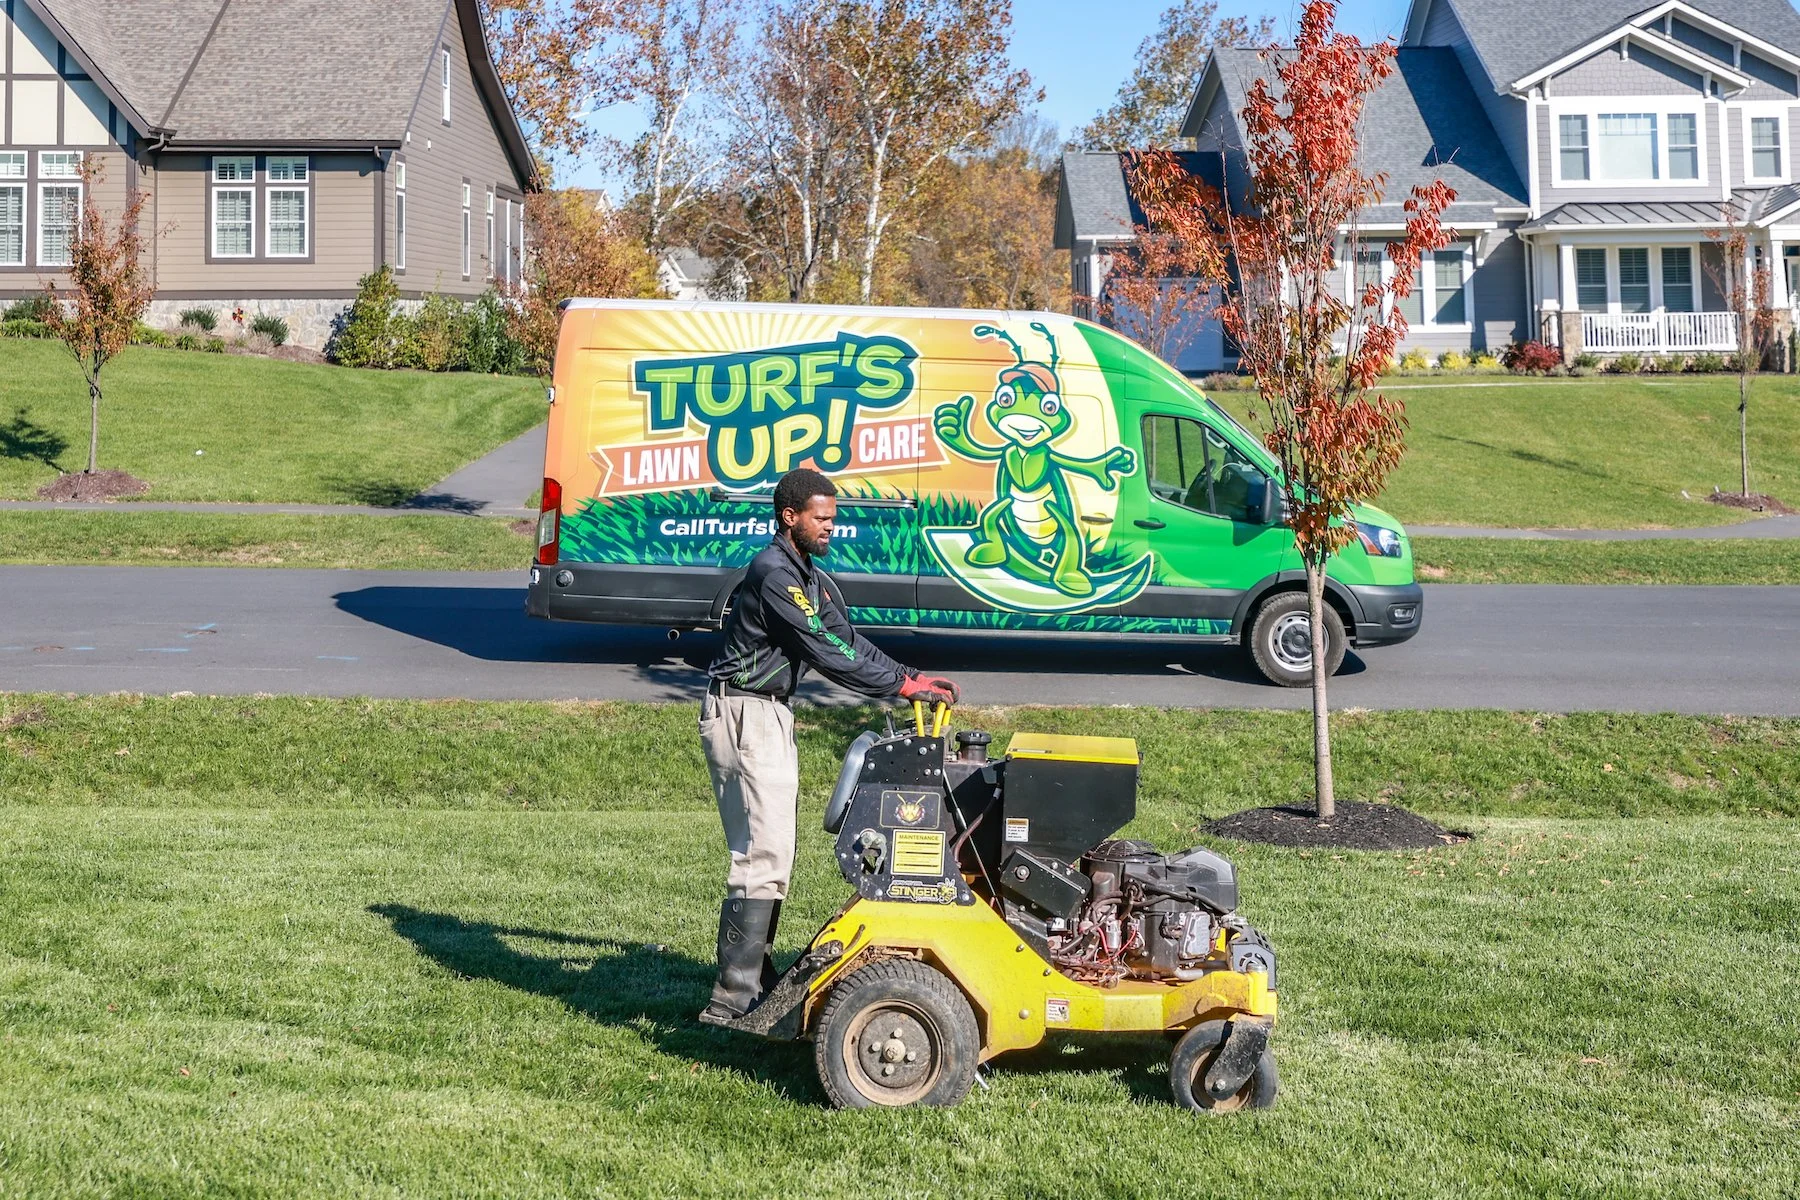 Guide to 3 Crucial Fall Lawn Care Tasks: Aeration, Overseeding, & Topdressing